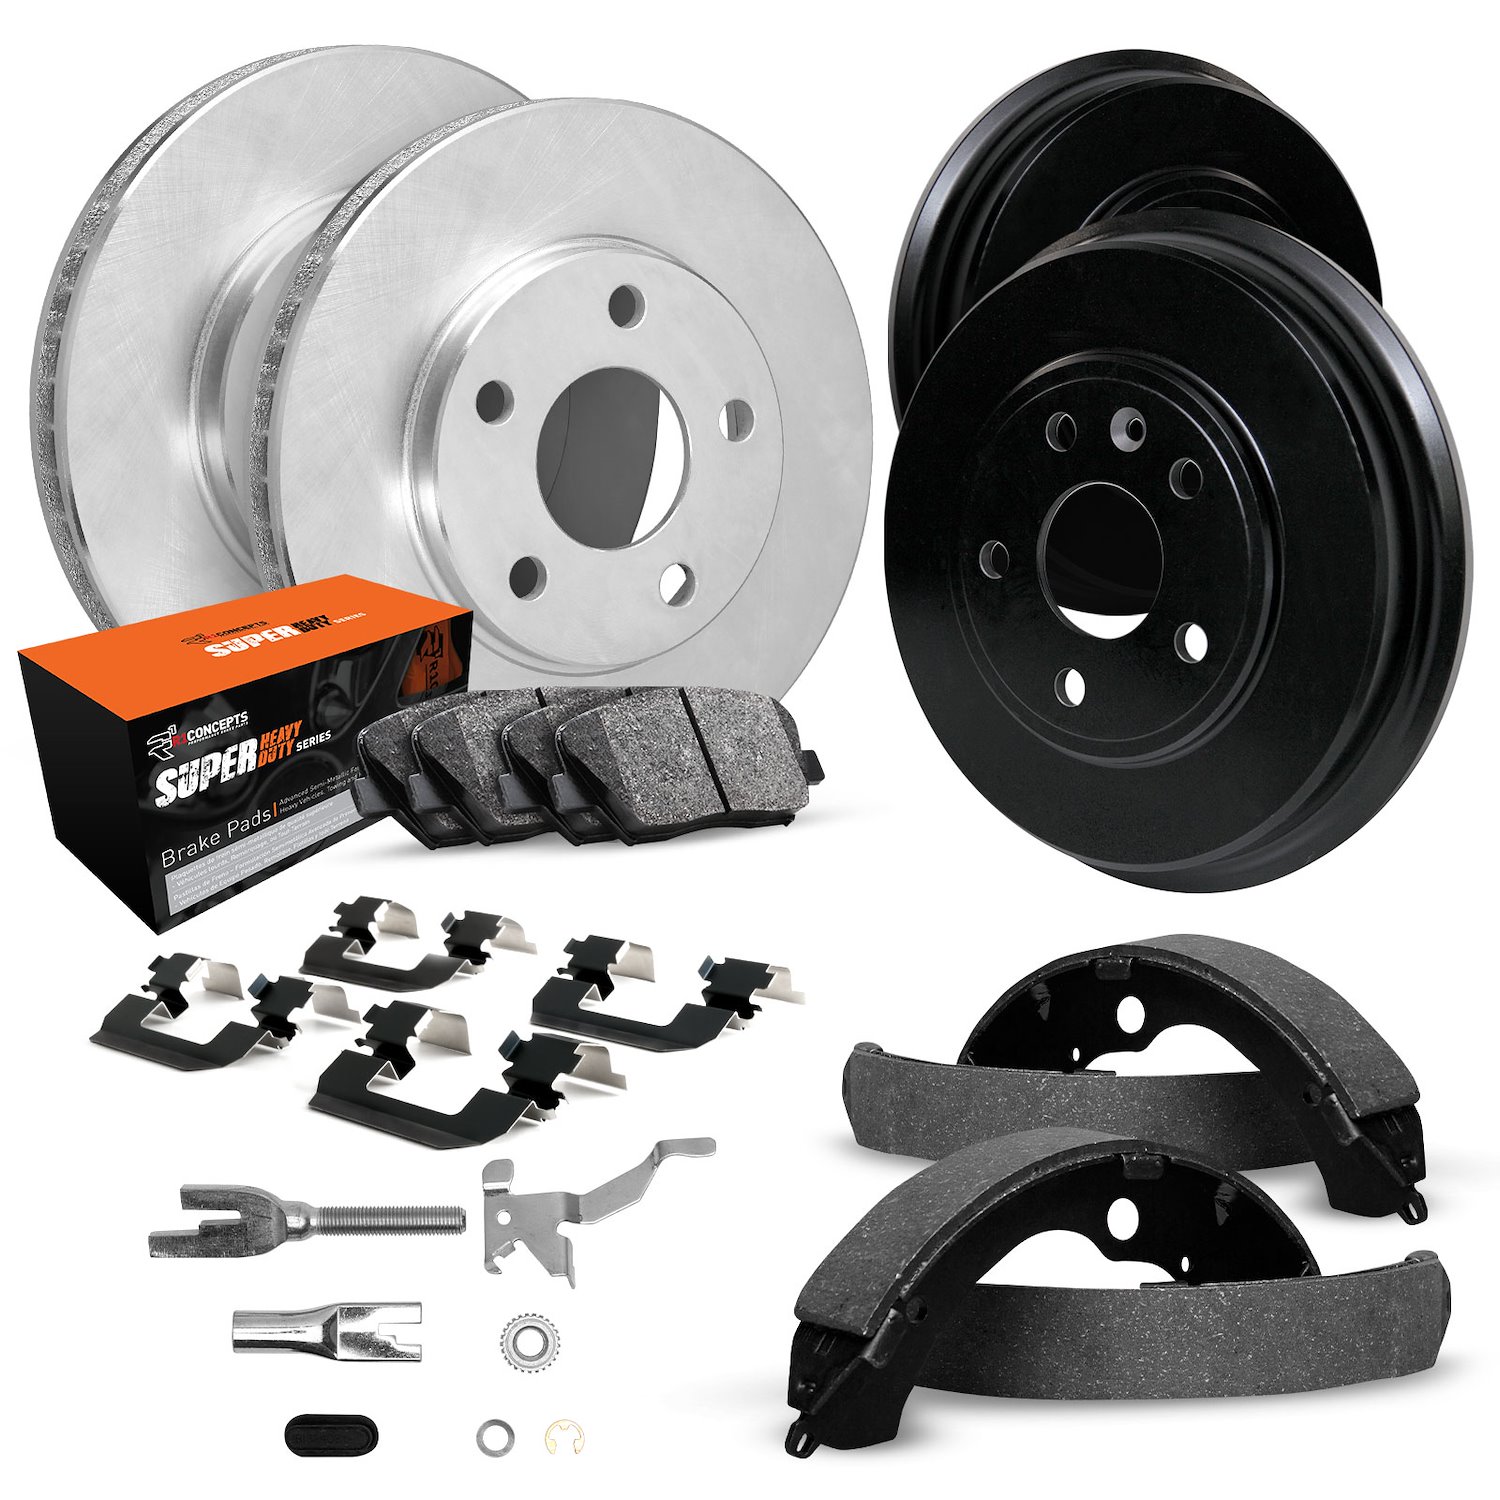 E-Line Blank Brake Rotor & Drum Set w/Super-Duty Pads, Shoes, Hardware, & Adjusters, 1984-1985 Ford/Lincoln/Mercury/Mazda